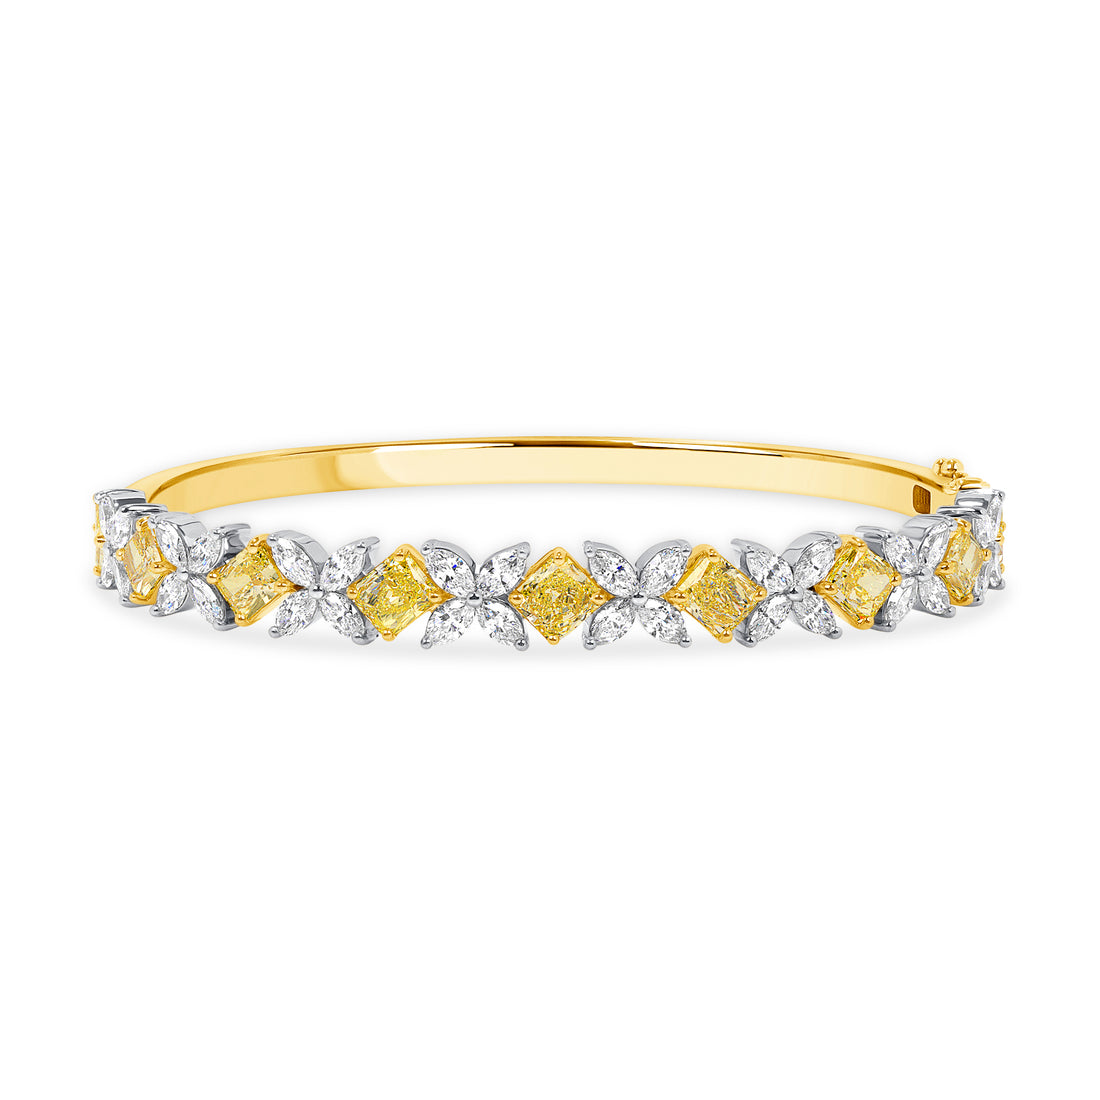 Fancy Yellow Square Diamond and Marquise Diamond Tennis Bracelet in 18K Yellow Gold and Platinum